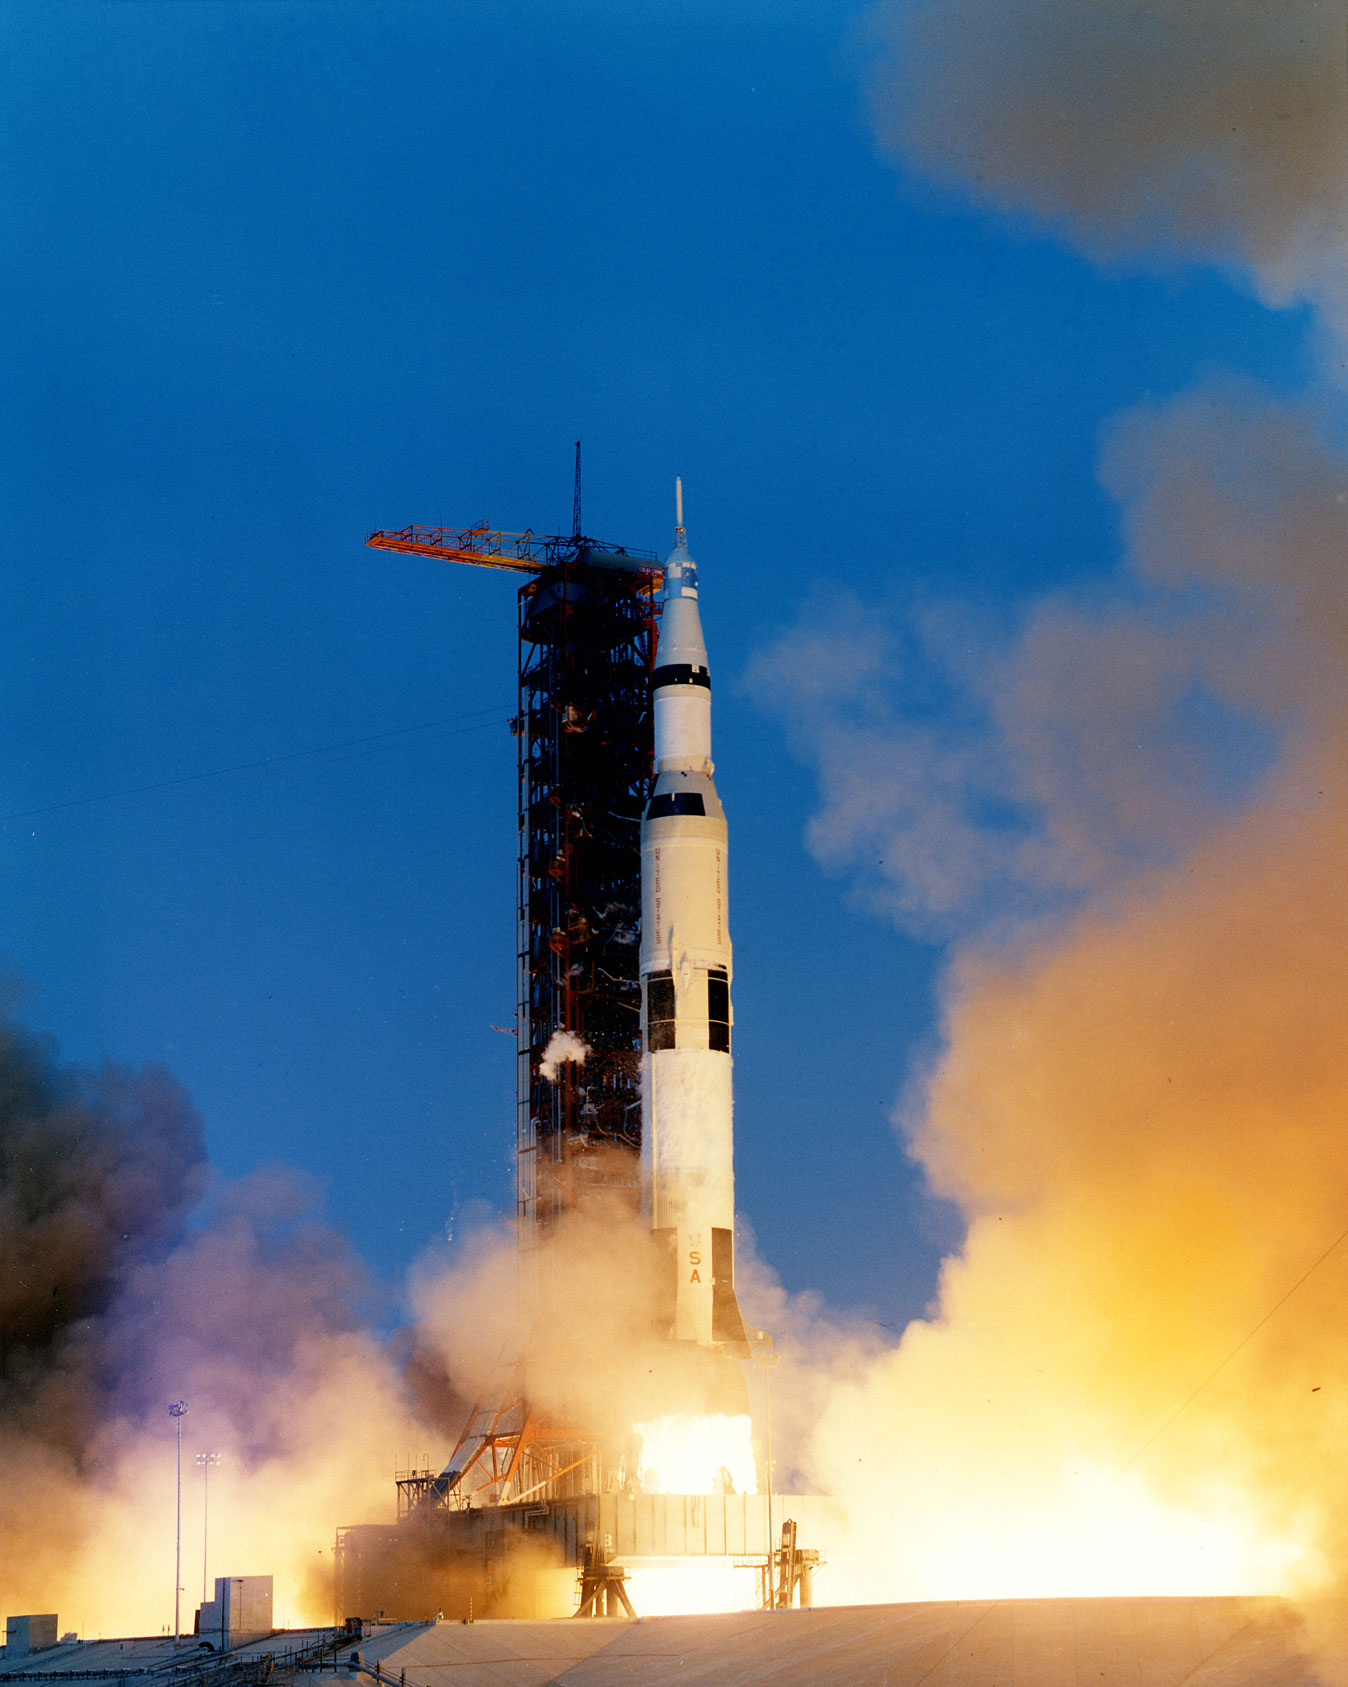 Apollo 13 (AS-508) lifts off from Launch Complex 39A at the Kennedy Space Center, Cape Canaveral, Florida, 19:13:00 UTC, 11 April 1970. (NASA)